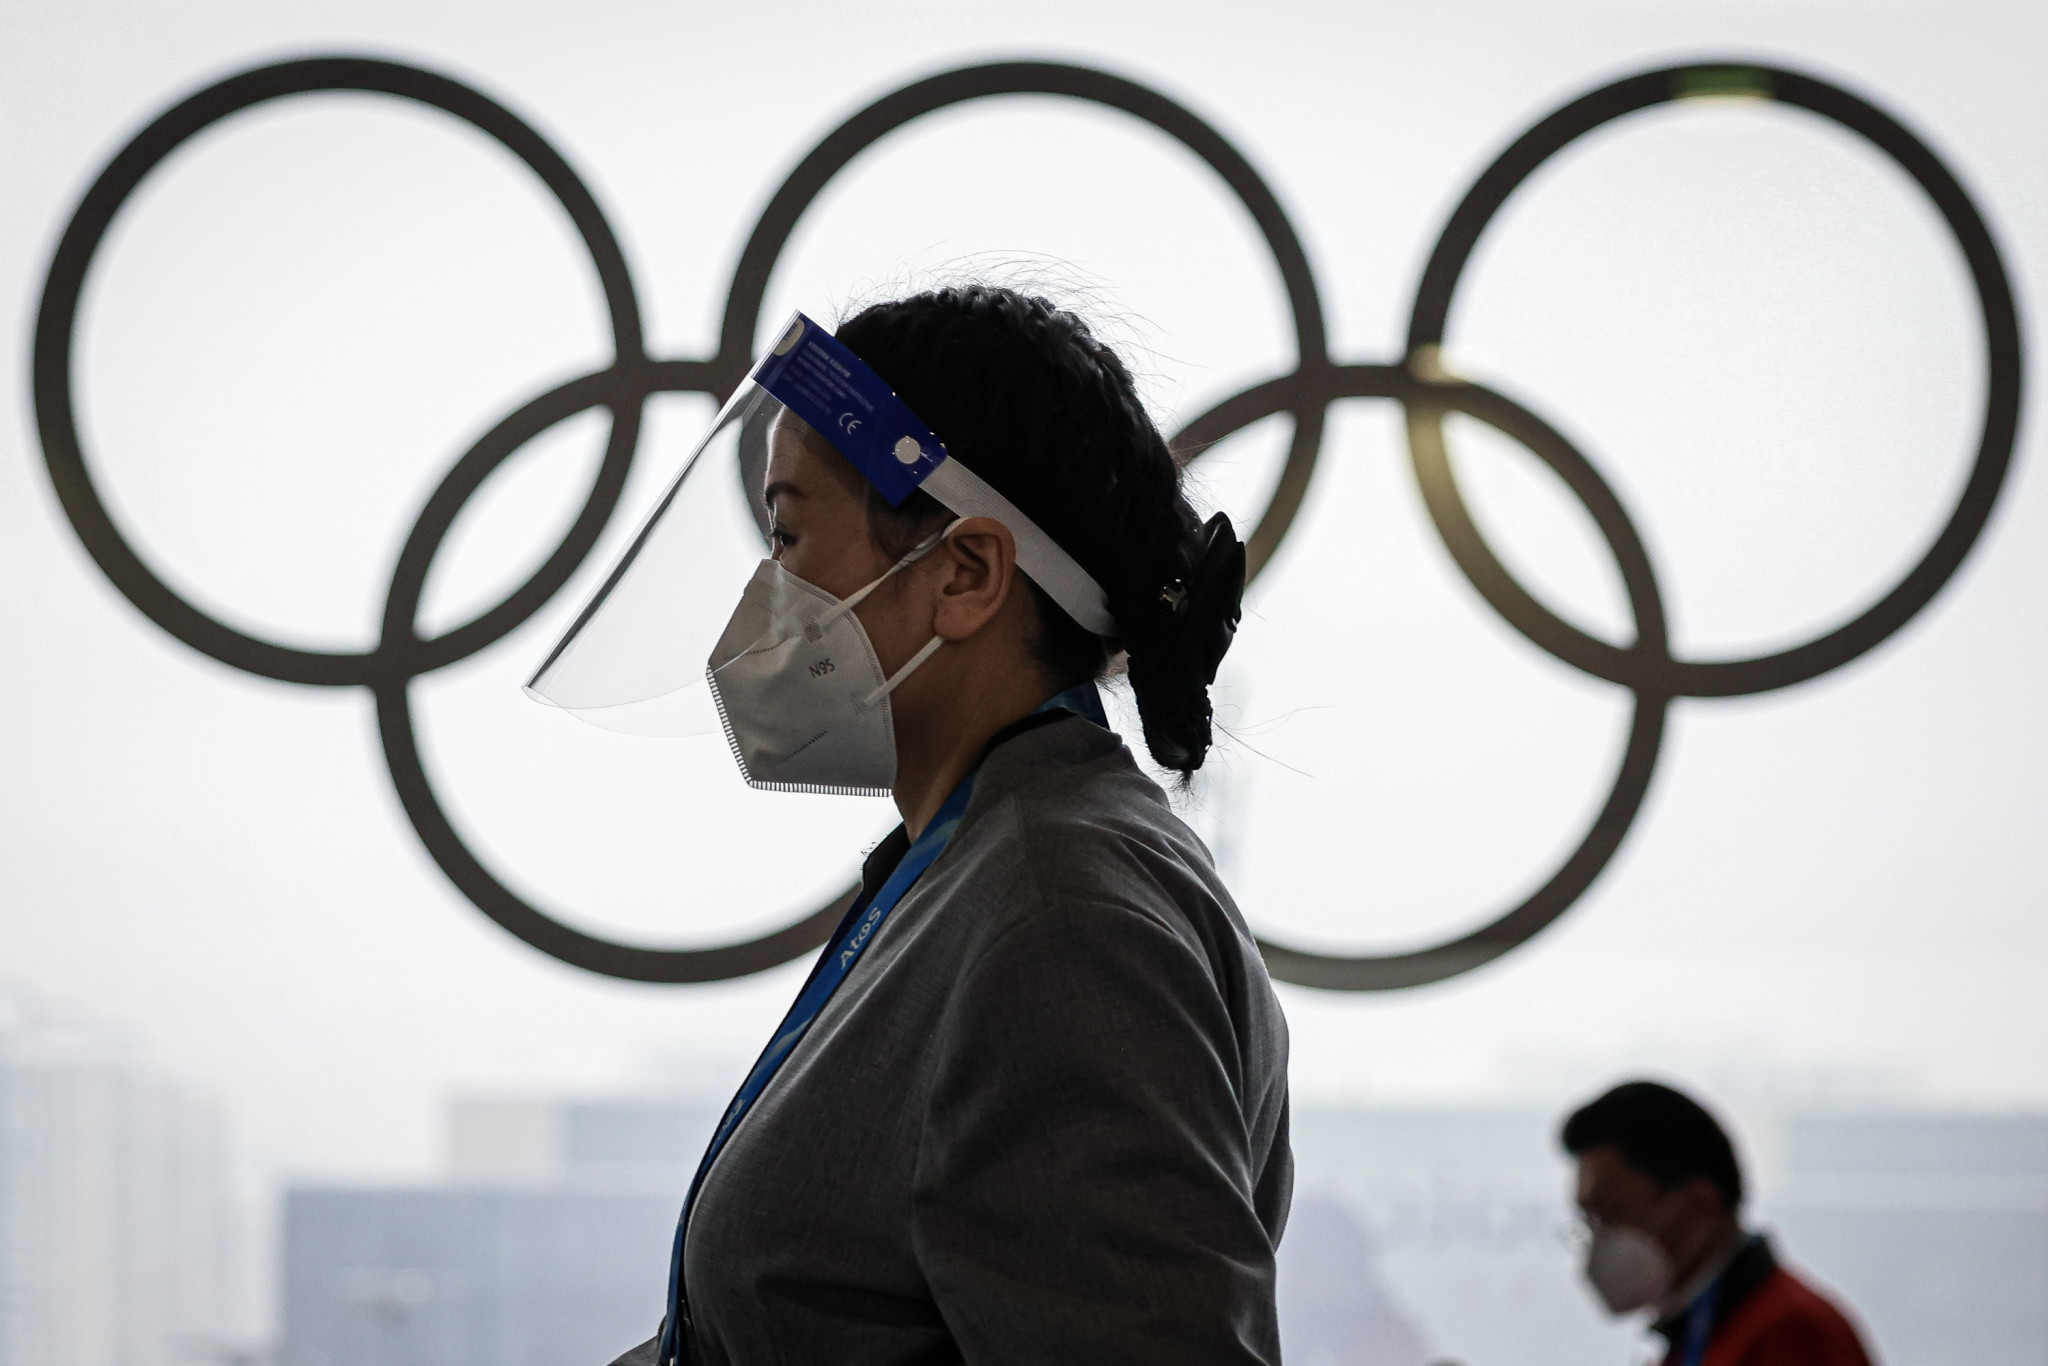 Beijing 2022 has reported its lowest daily figure of COVID-19 cases with just one reported yesterday ©Getty Images